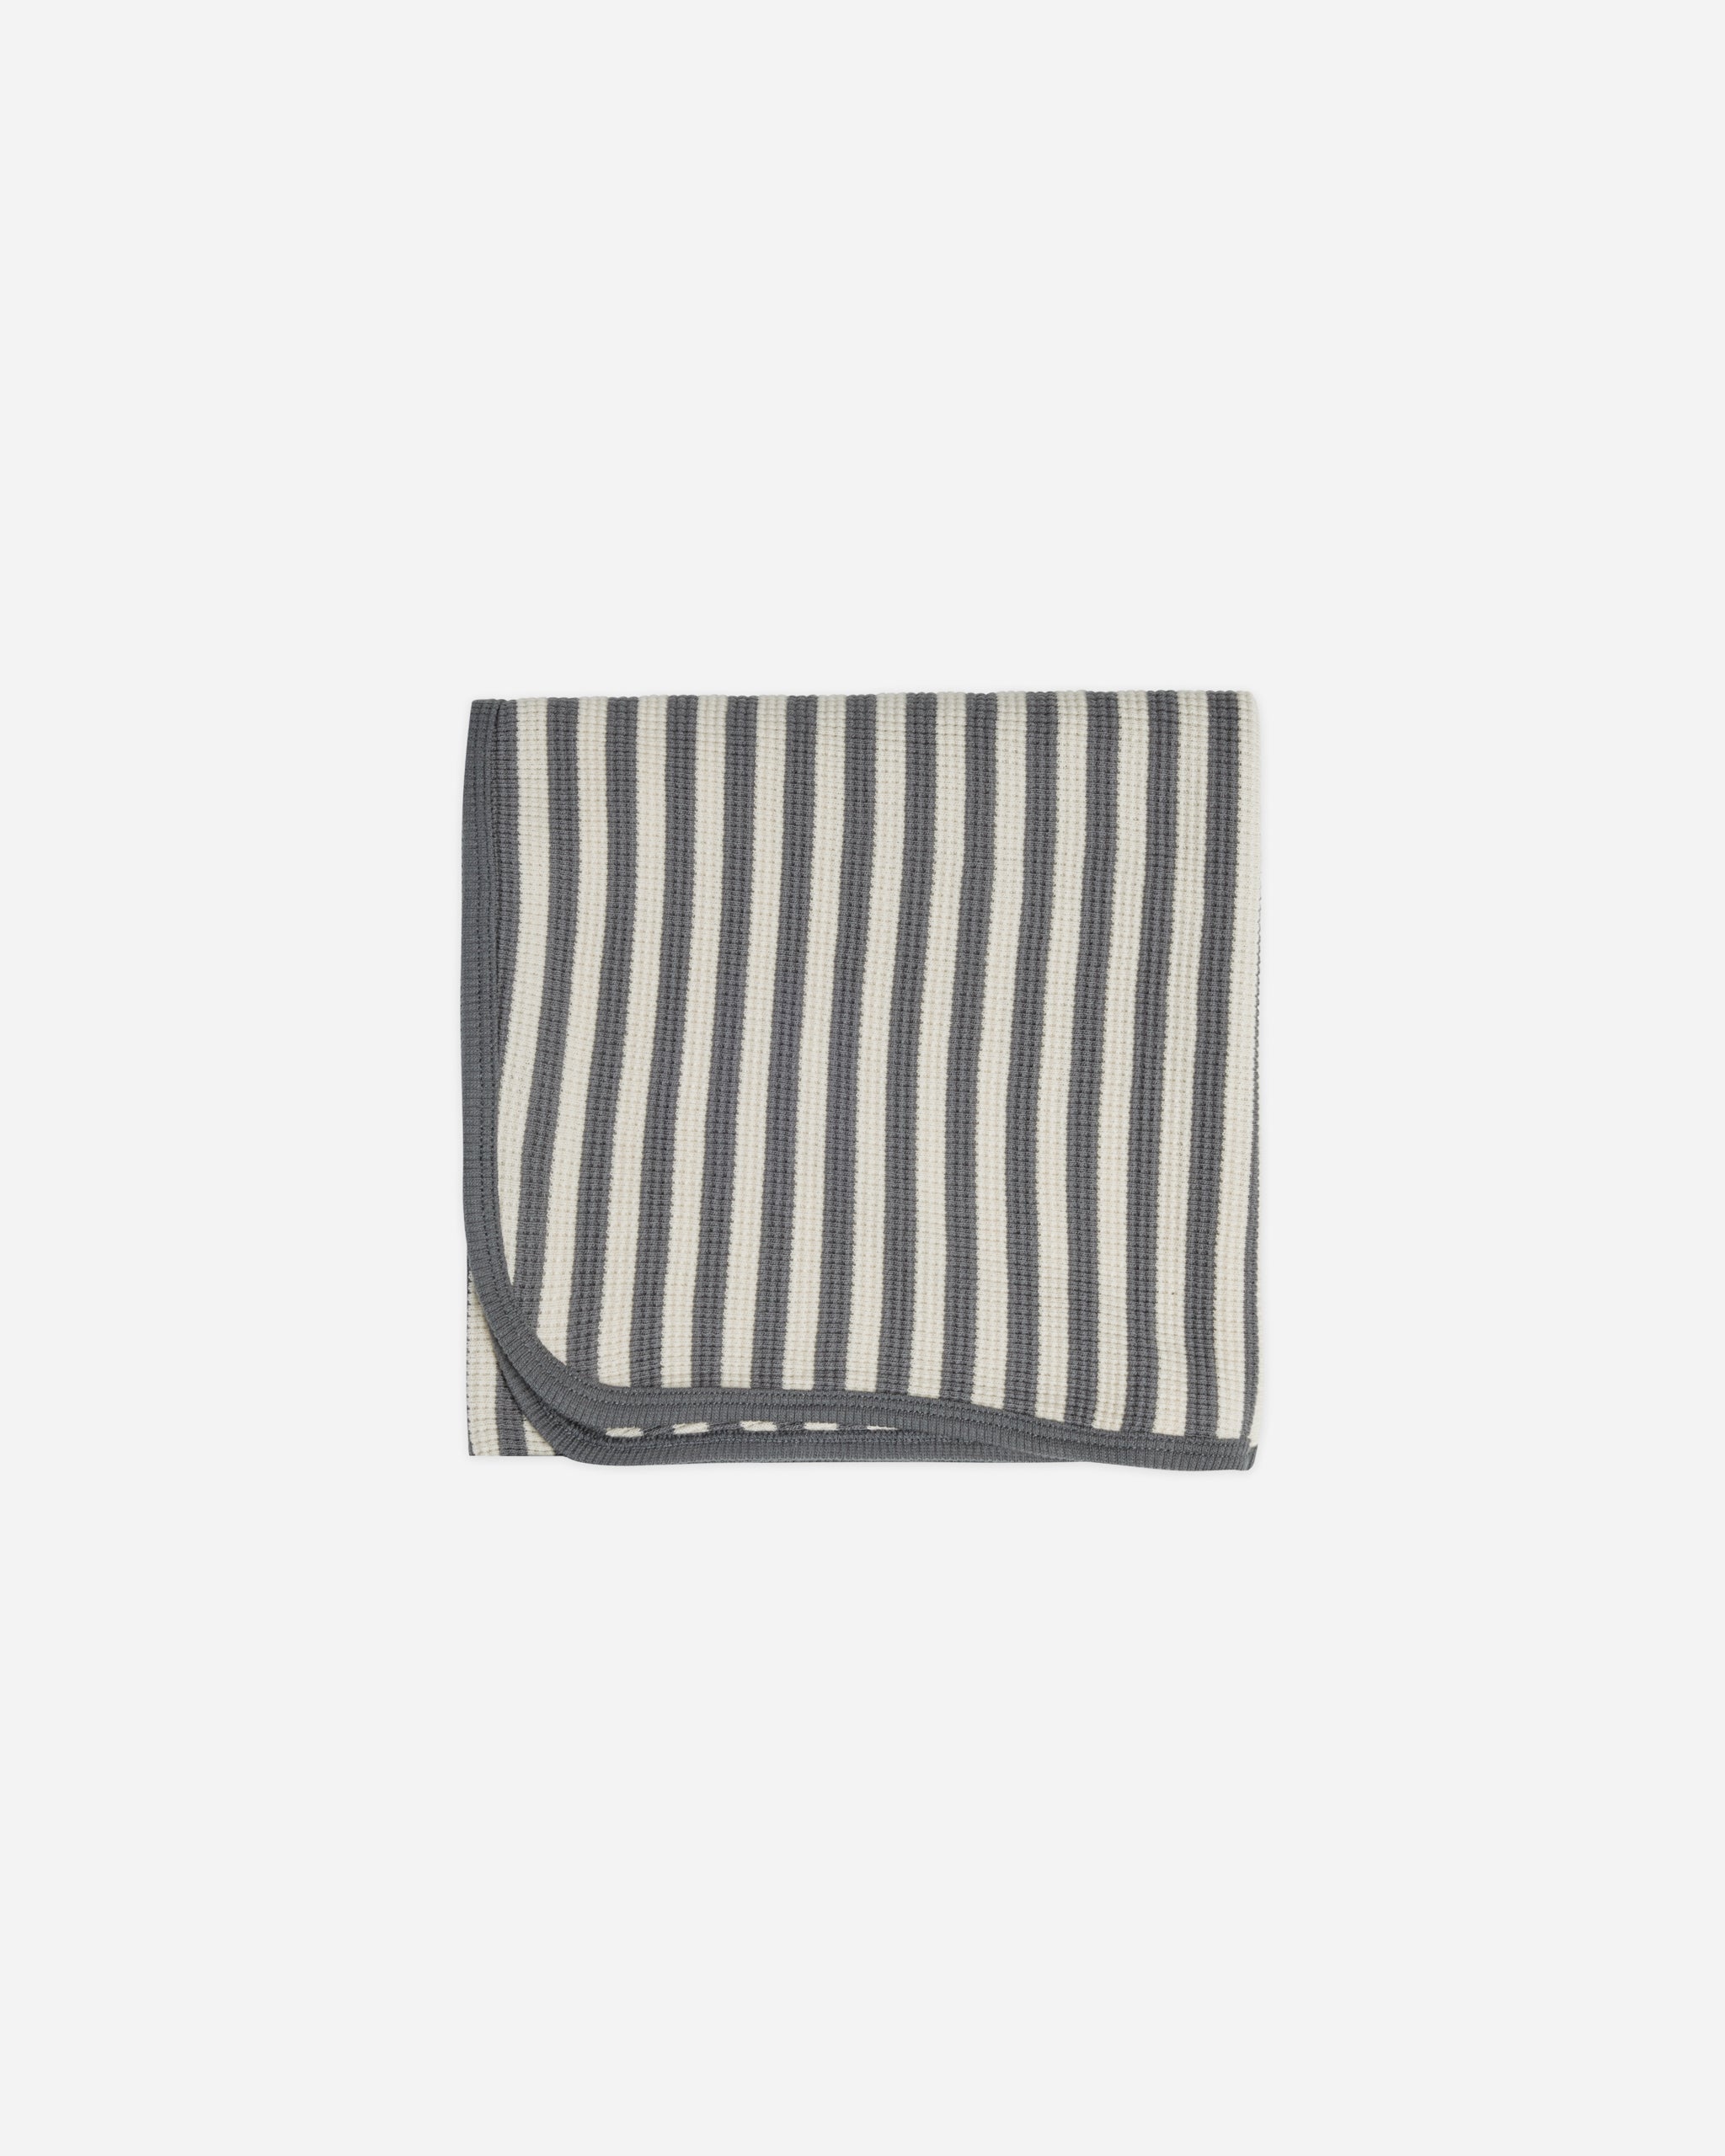 Waffle Baby Blanket || Navy Stripe - Rylee + Cru | Kids Clothes | Trendy Baby Clothes | Modern Infant Outfits |